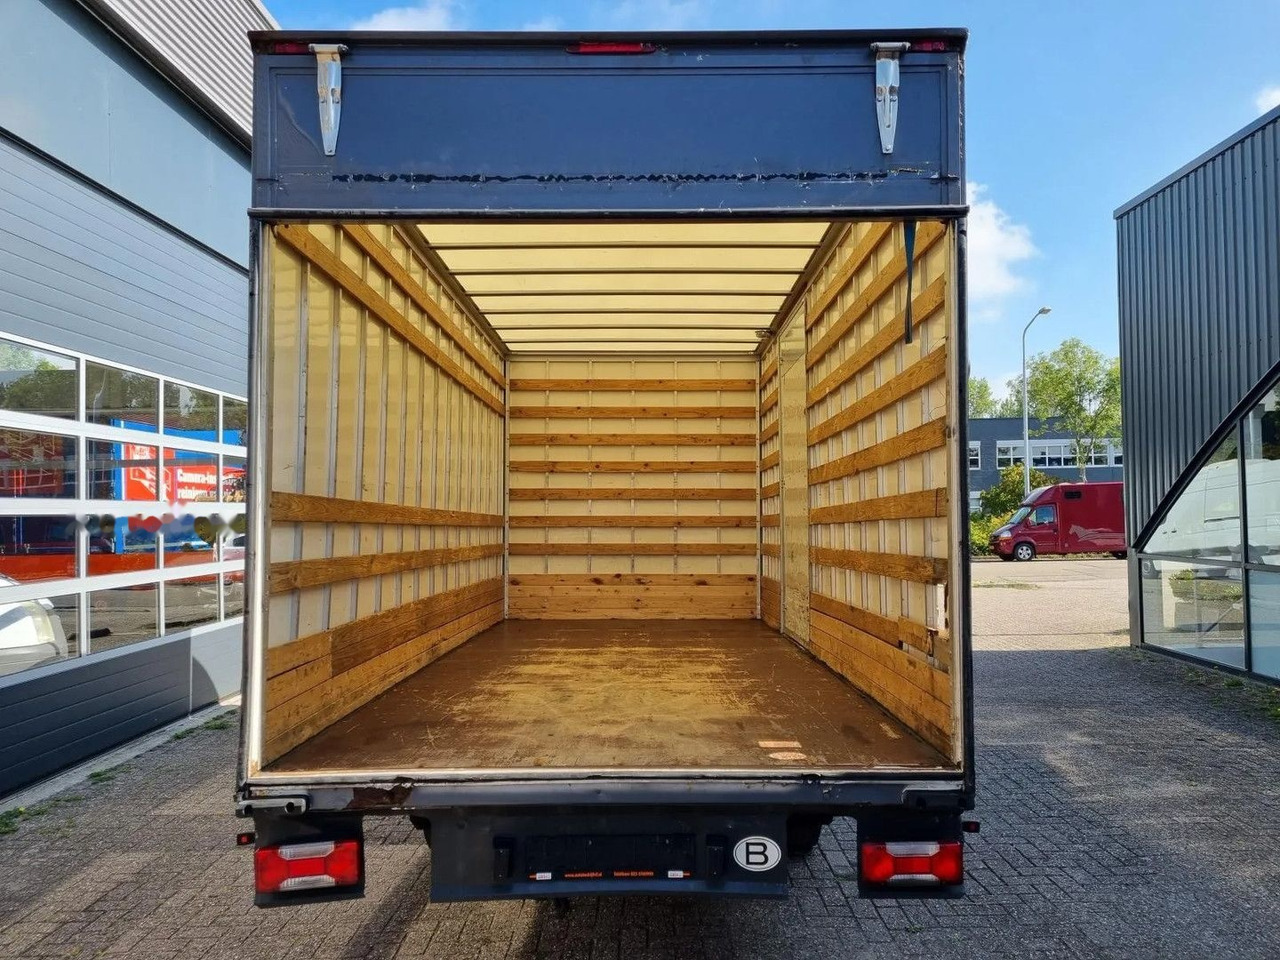 Koffer Transporter IVECO Daily 50C18 Koffer